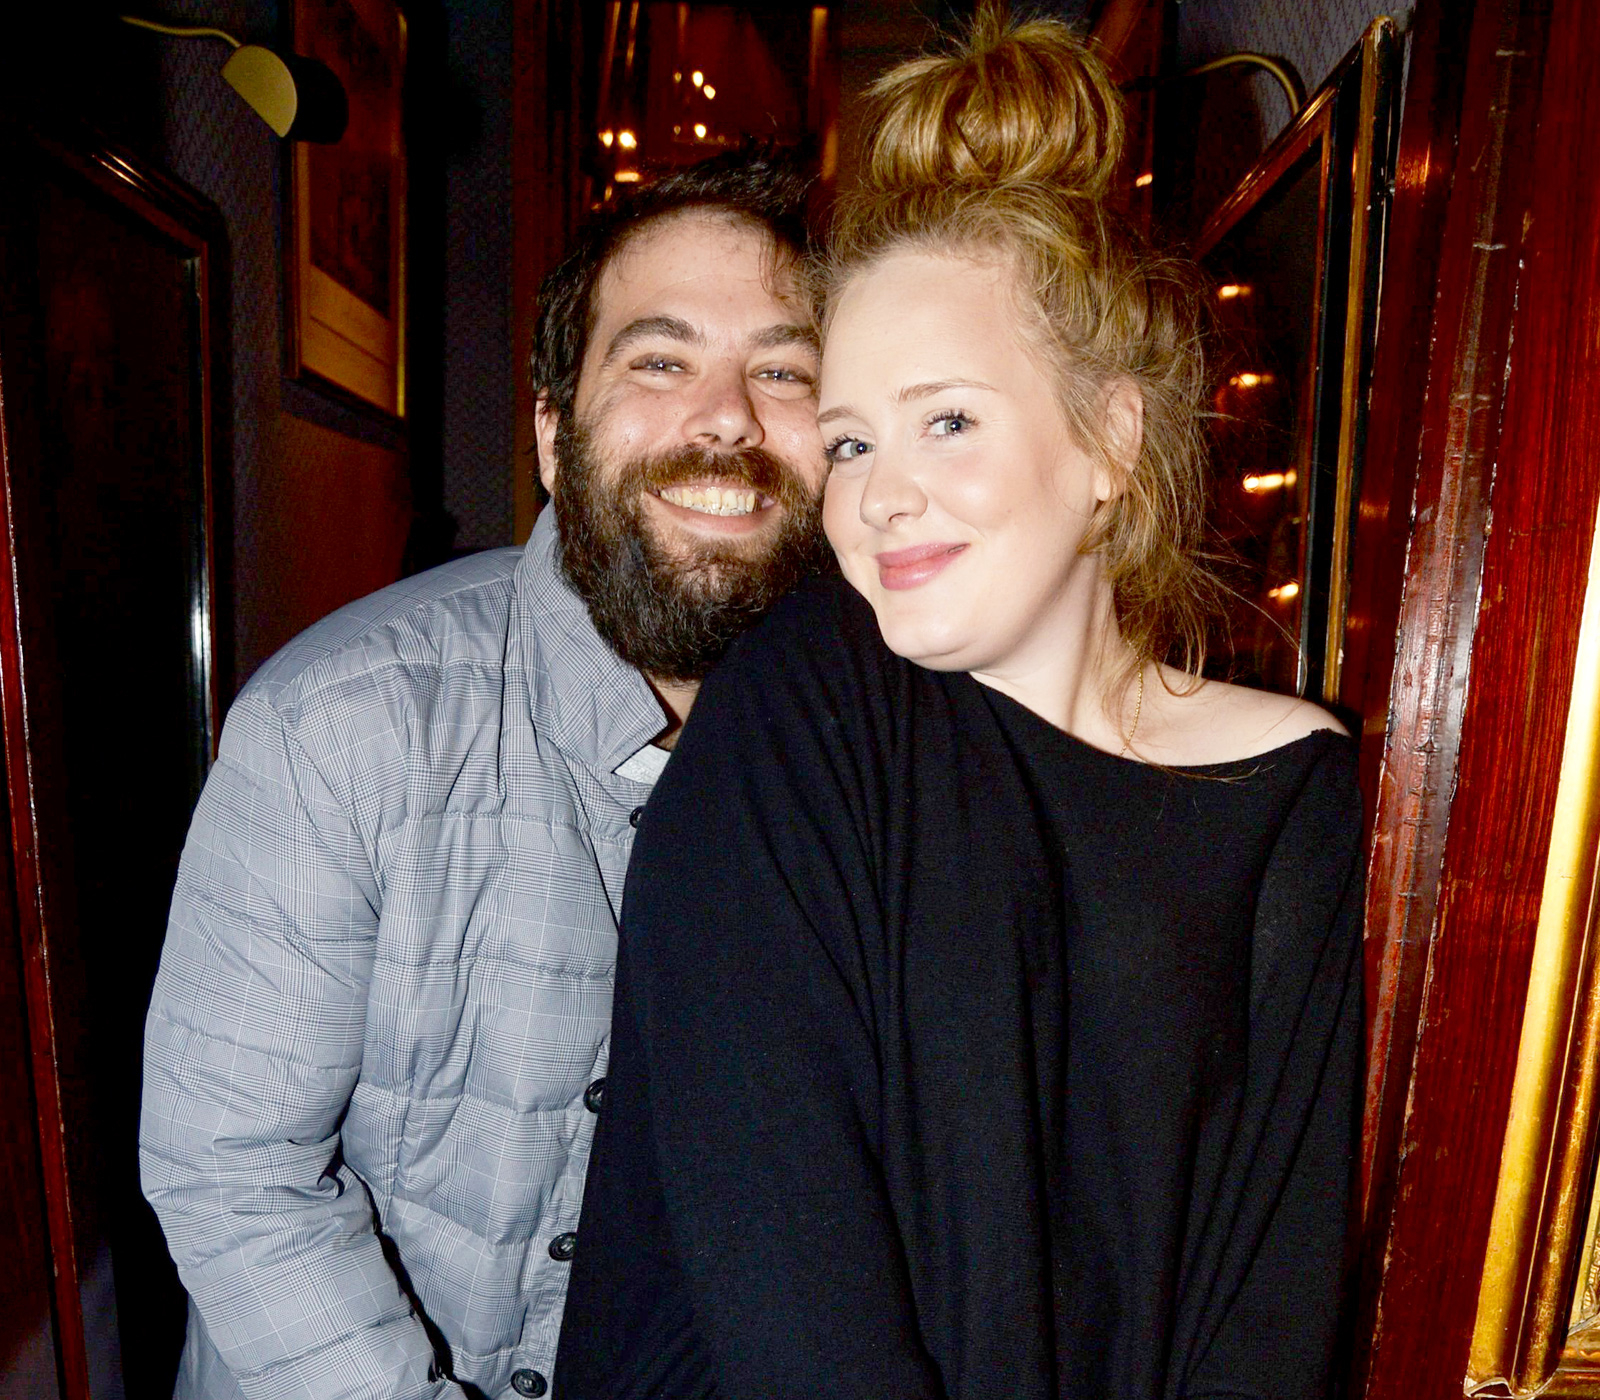 What We Know About Adele and Her ‘Husband’ Simon Konecki1600 x 1400